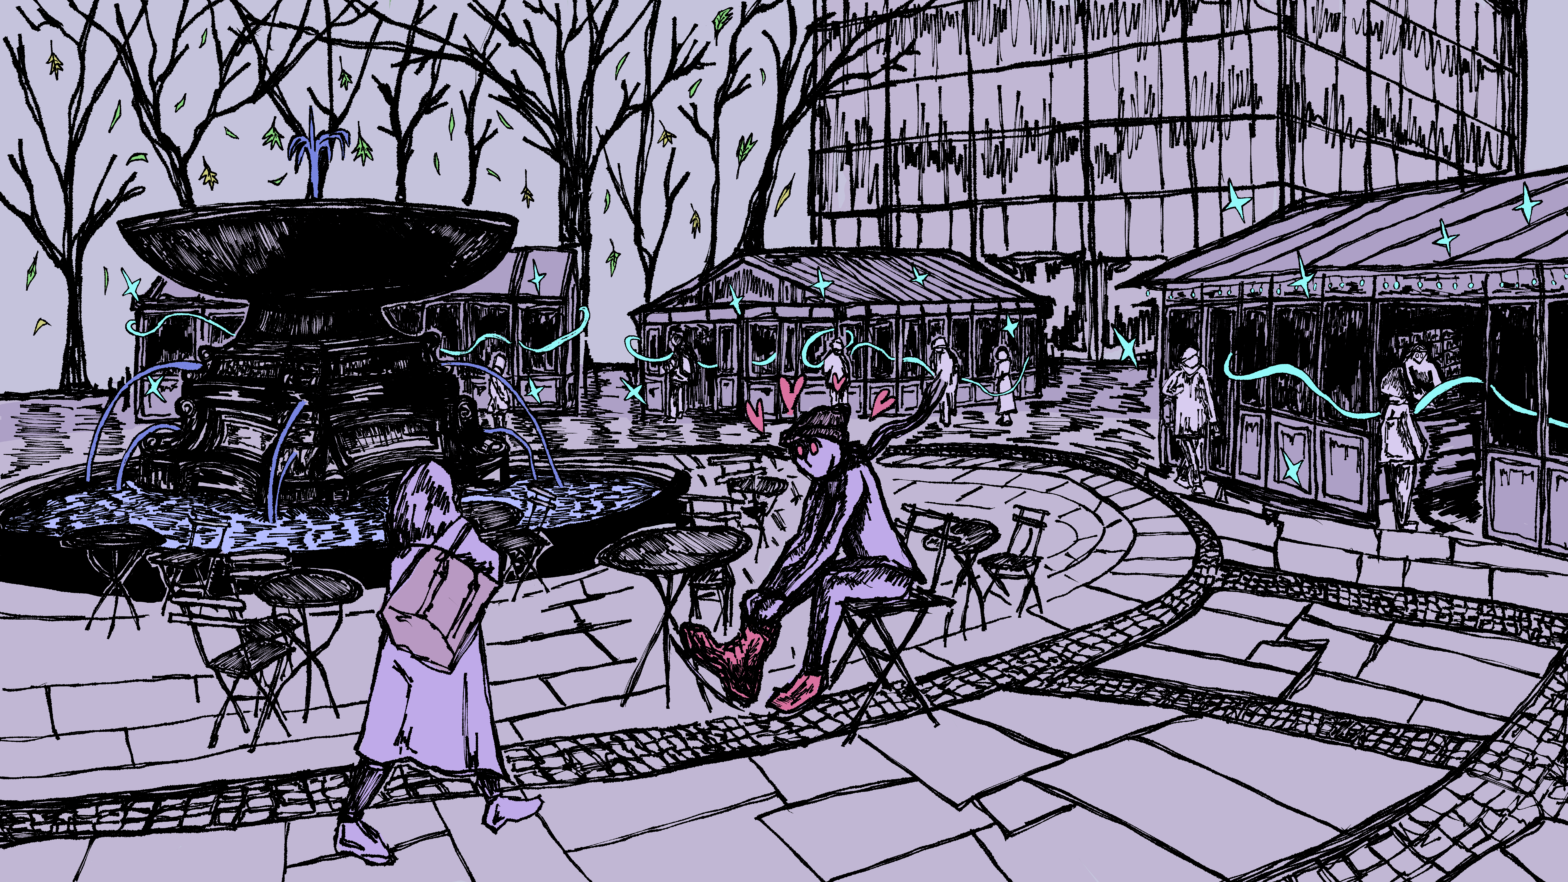 A light purple illustration of Bryant Park showcasing the iconic fountain, the holiday market with swirling sparks of magic, and a person putting on ice skates with hearts above them.